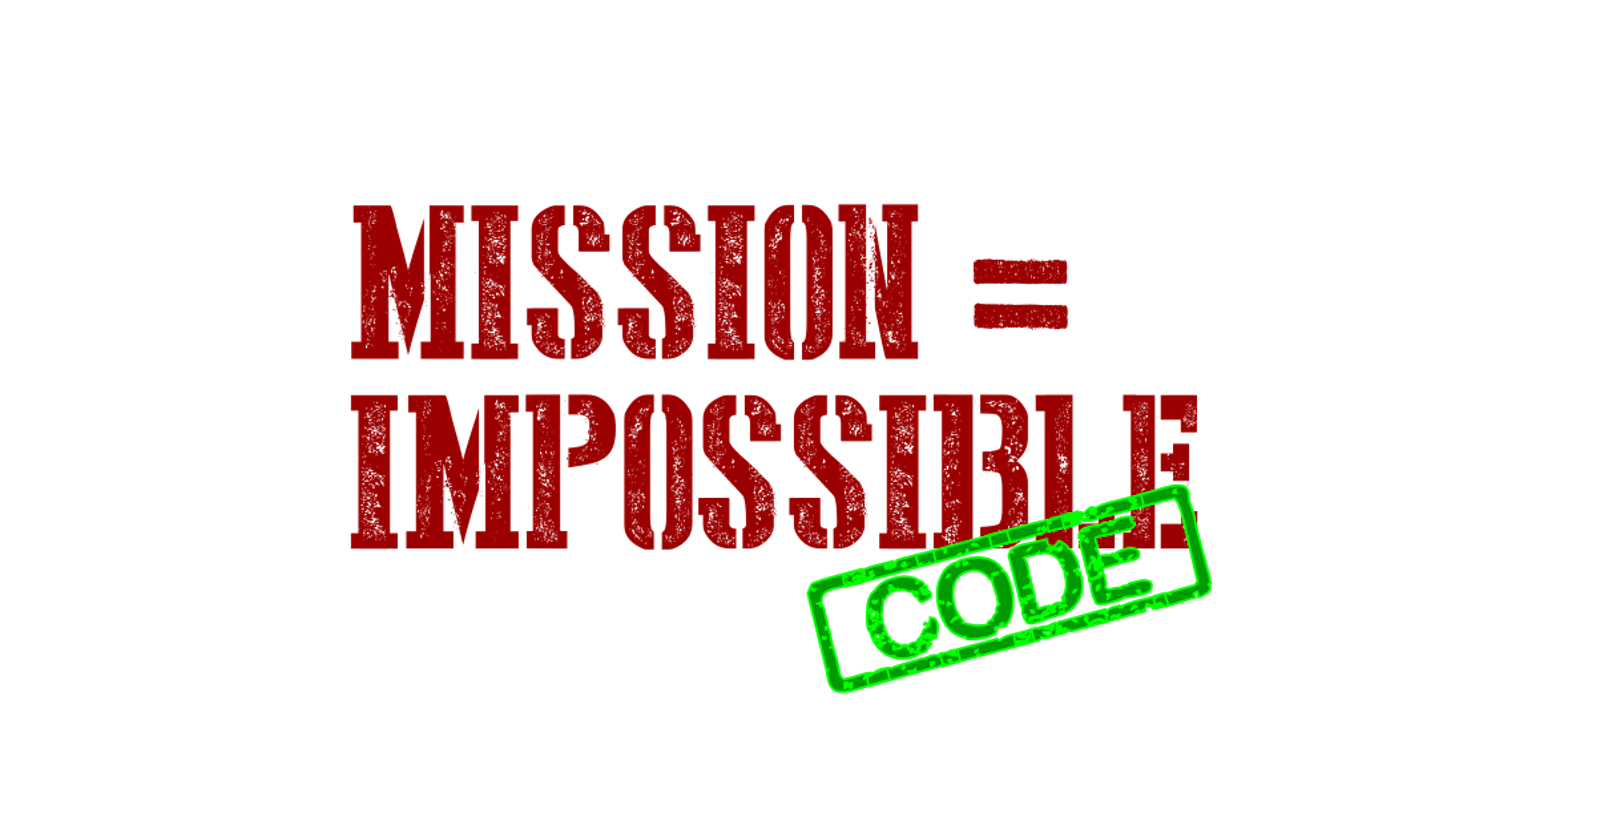 Mission Impossible Code Part 2: Extreme Multilingual IaC (via Preflight TCP Connect Testing a List of Endpoints in Both Bash and PowerShell)